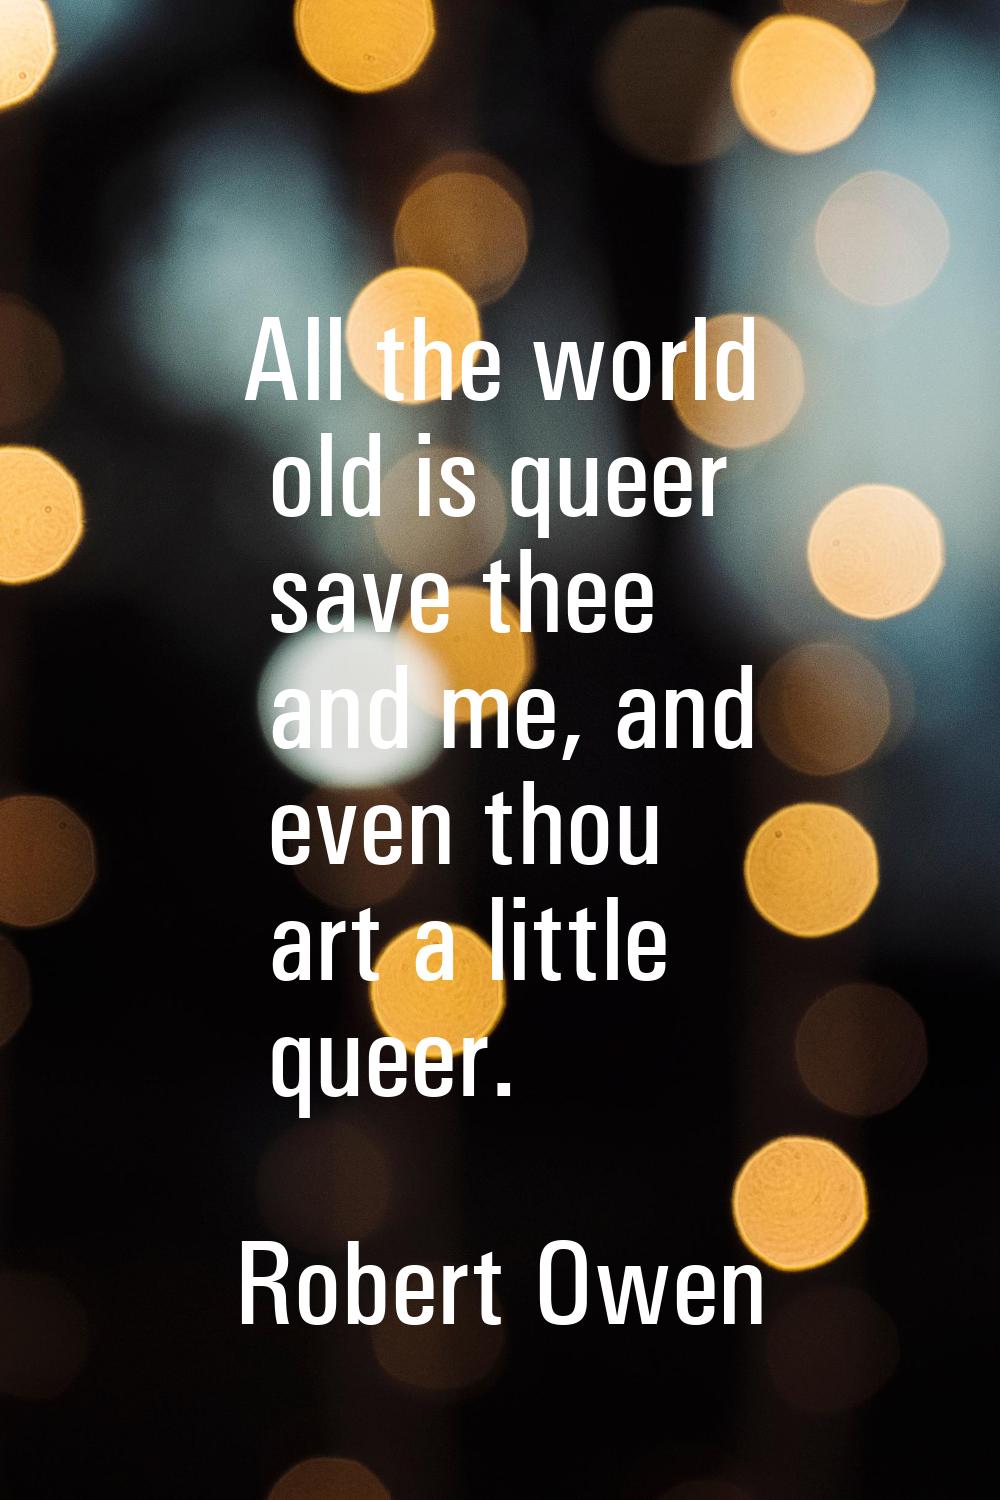 All the world old is queer save thee and me, and even thou art a little queer.